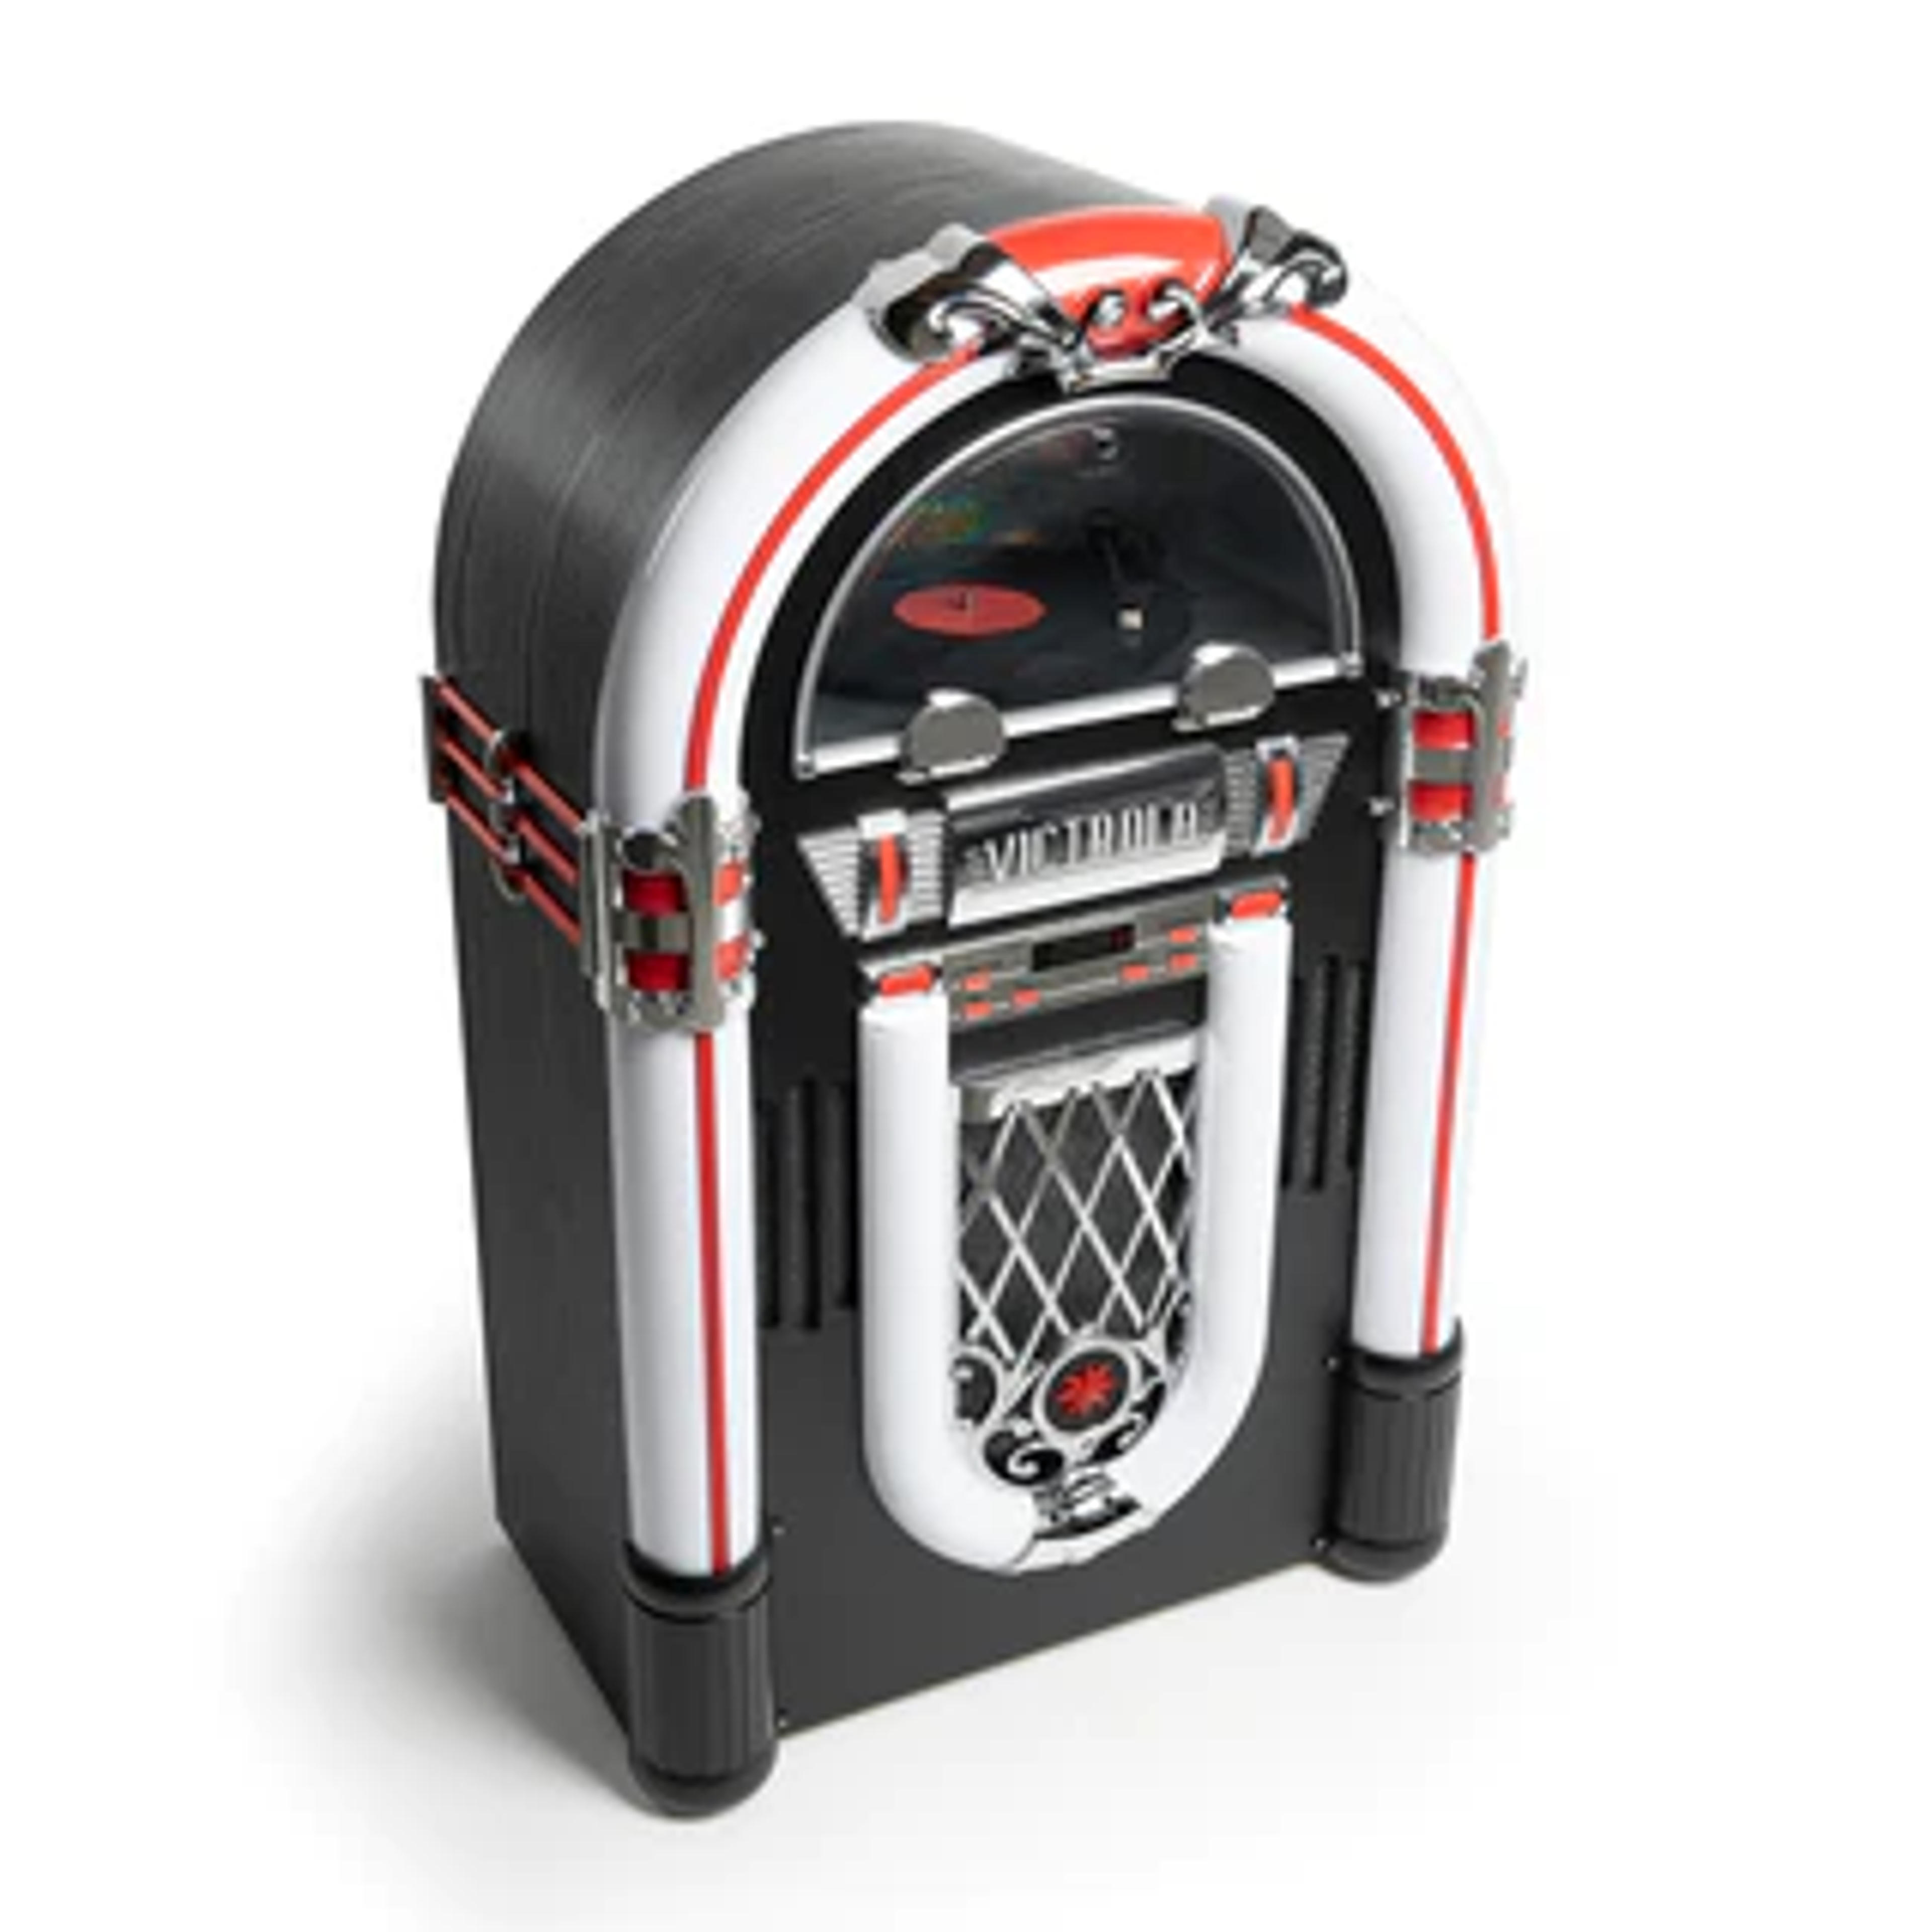 The Mayfield Full-Size Jukebox – Victrola.com